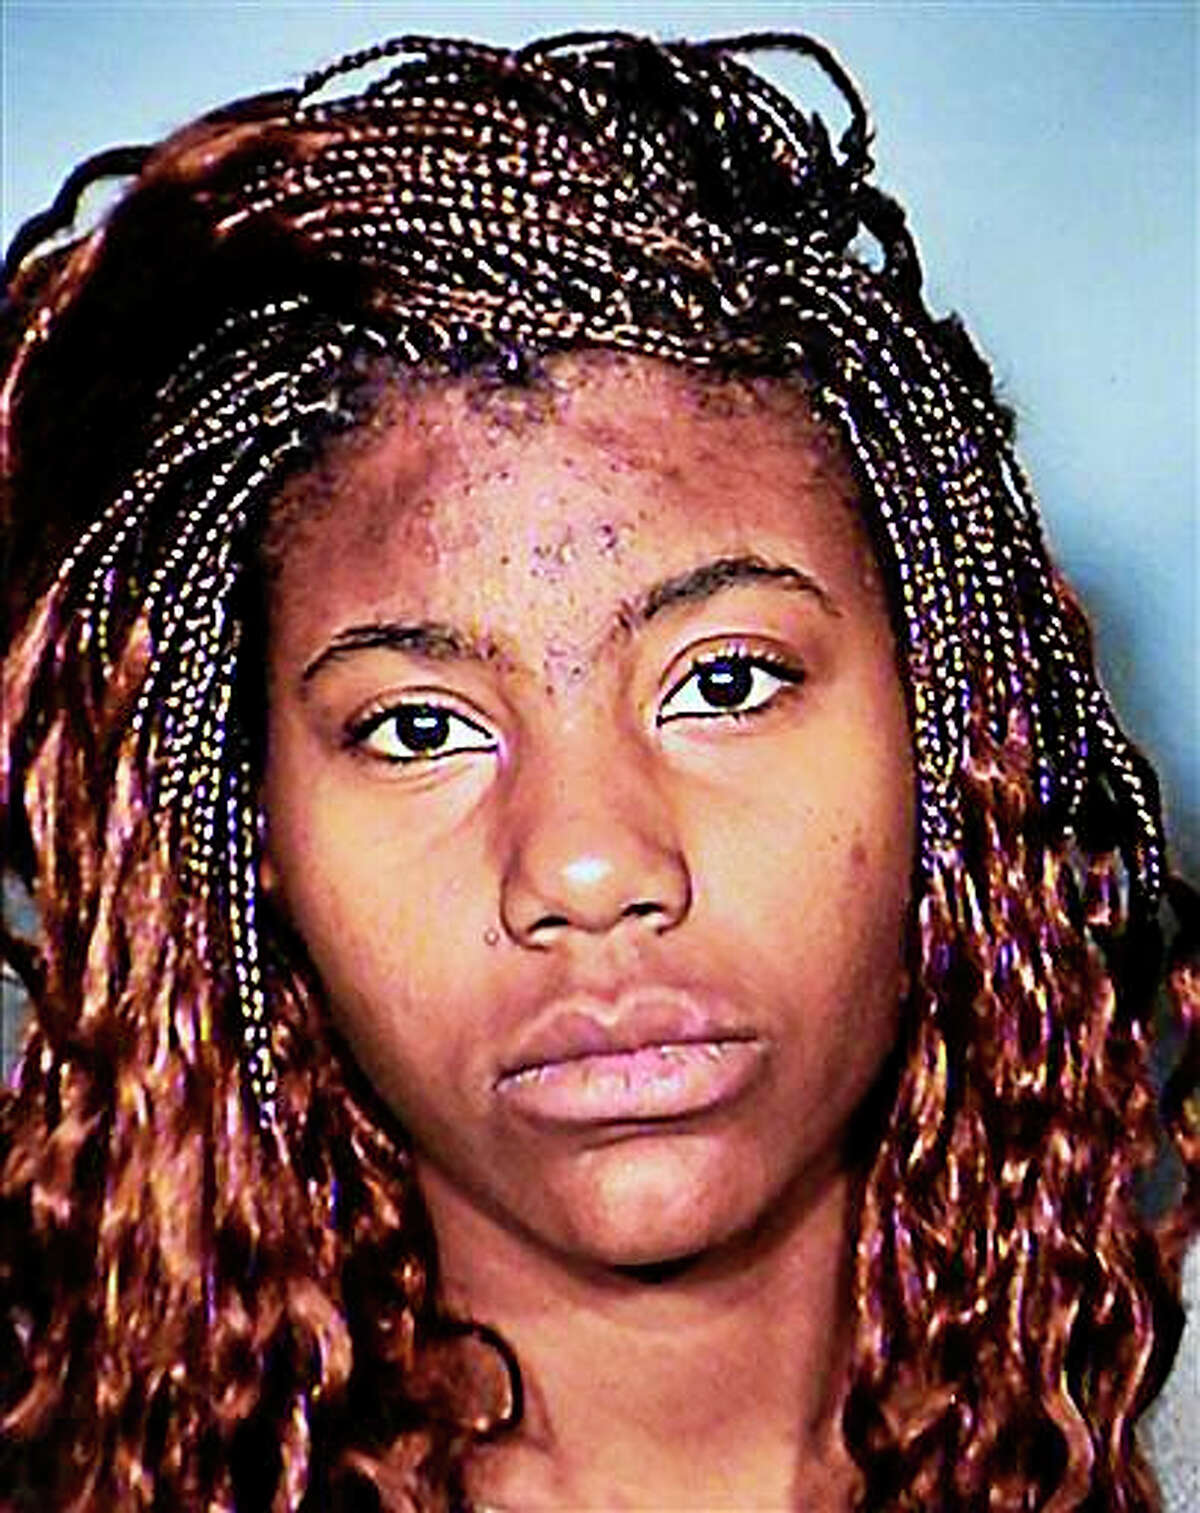 This photo provided by the Las Vegas Metropolitan Police Department shows Lakeisha N. Holloway, who police said smashed into crowds of pedestrians on the Las Vegas Strip on Sunday, Dec. 20, 2015, killing one person and injuring dozens.